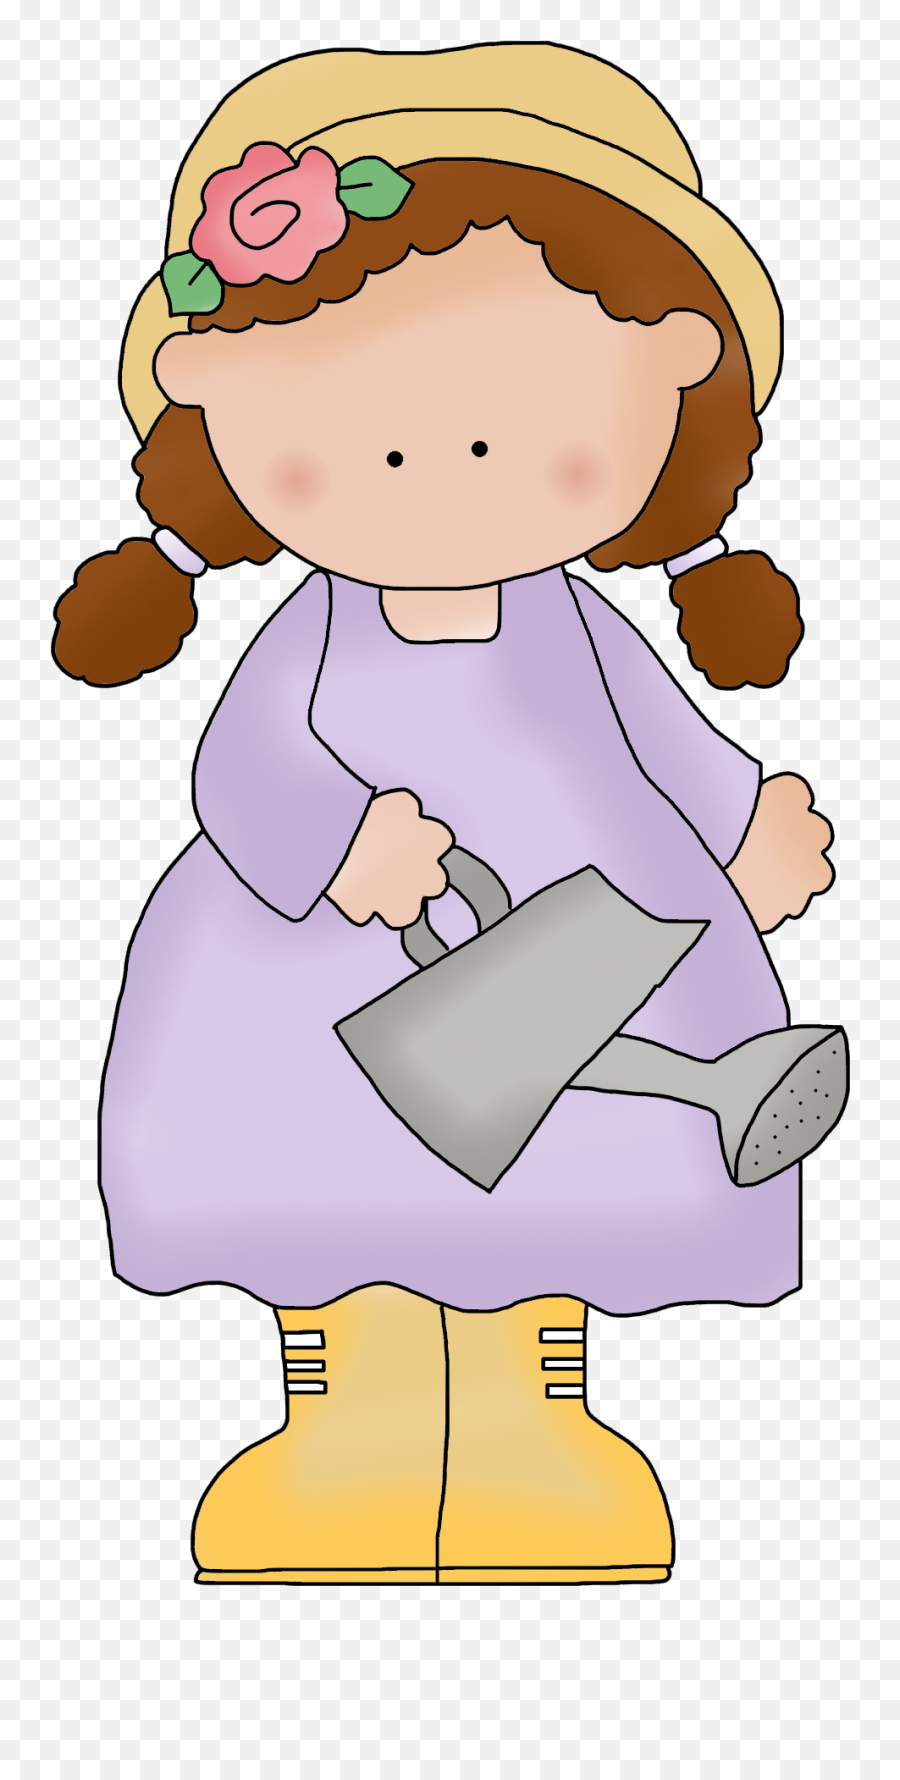 Teaching With Nursery Rhymes Homeschool - Mary Mary Quite Contrary Clipart Emoji,Nursery Rhymes Clipart